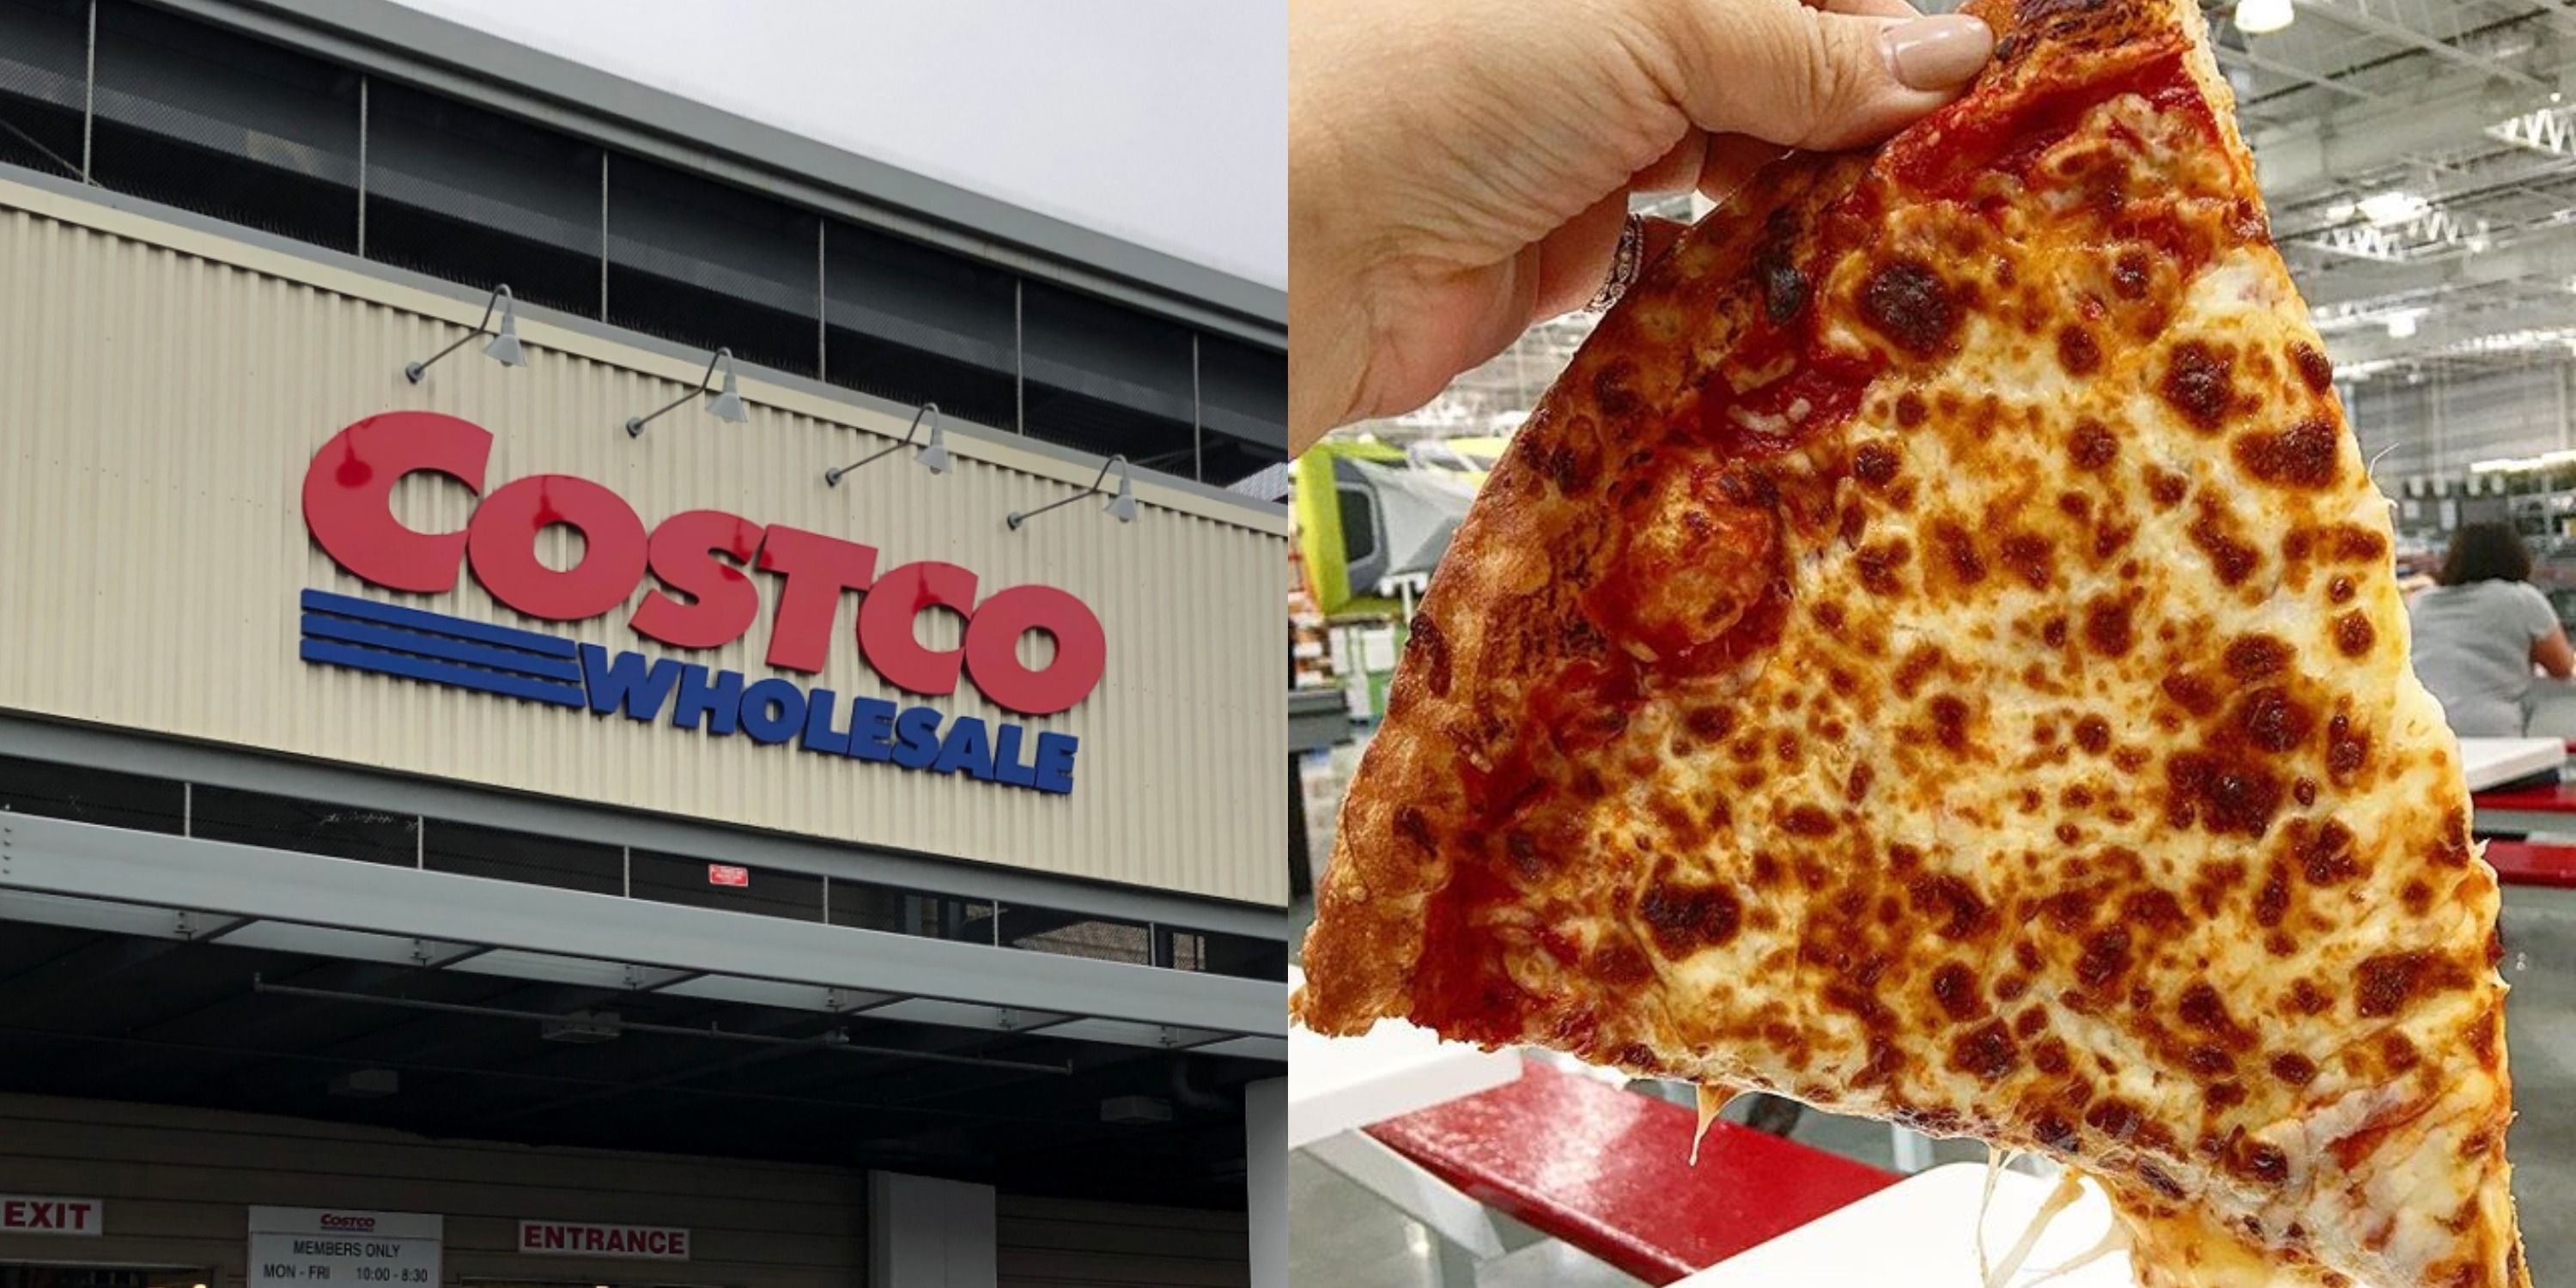 Costco Won't Let People Eat At Its Food Court Without A Membership